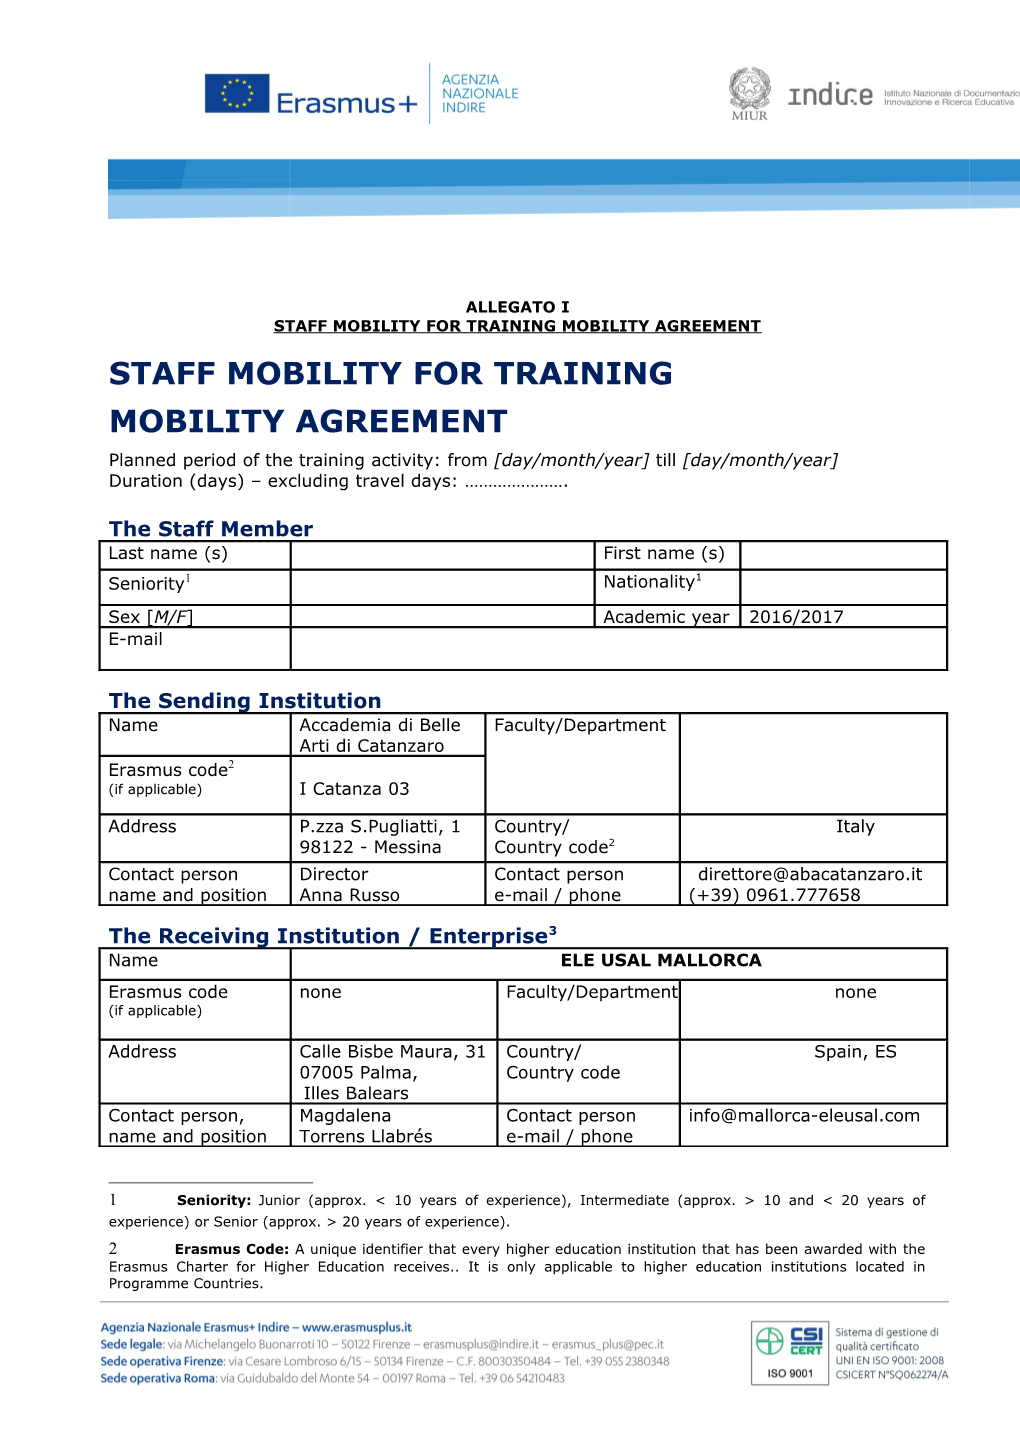 Staff Mobility for Training Mobility Agreement